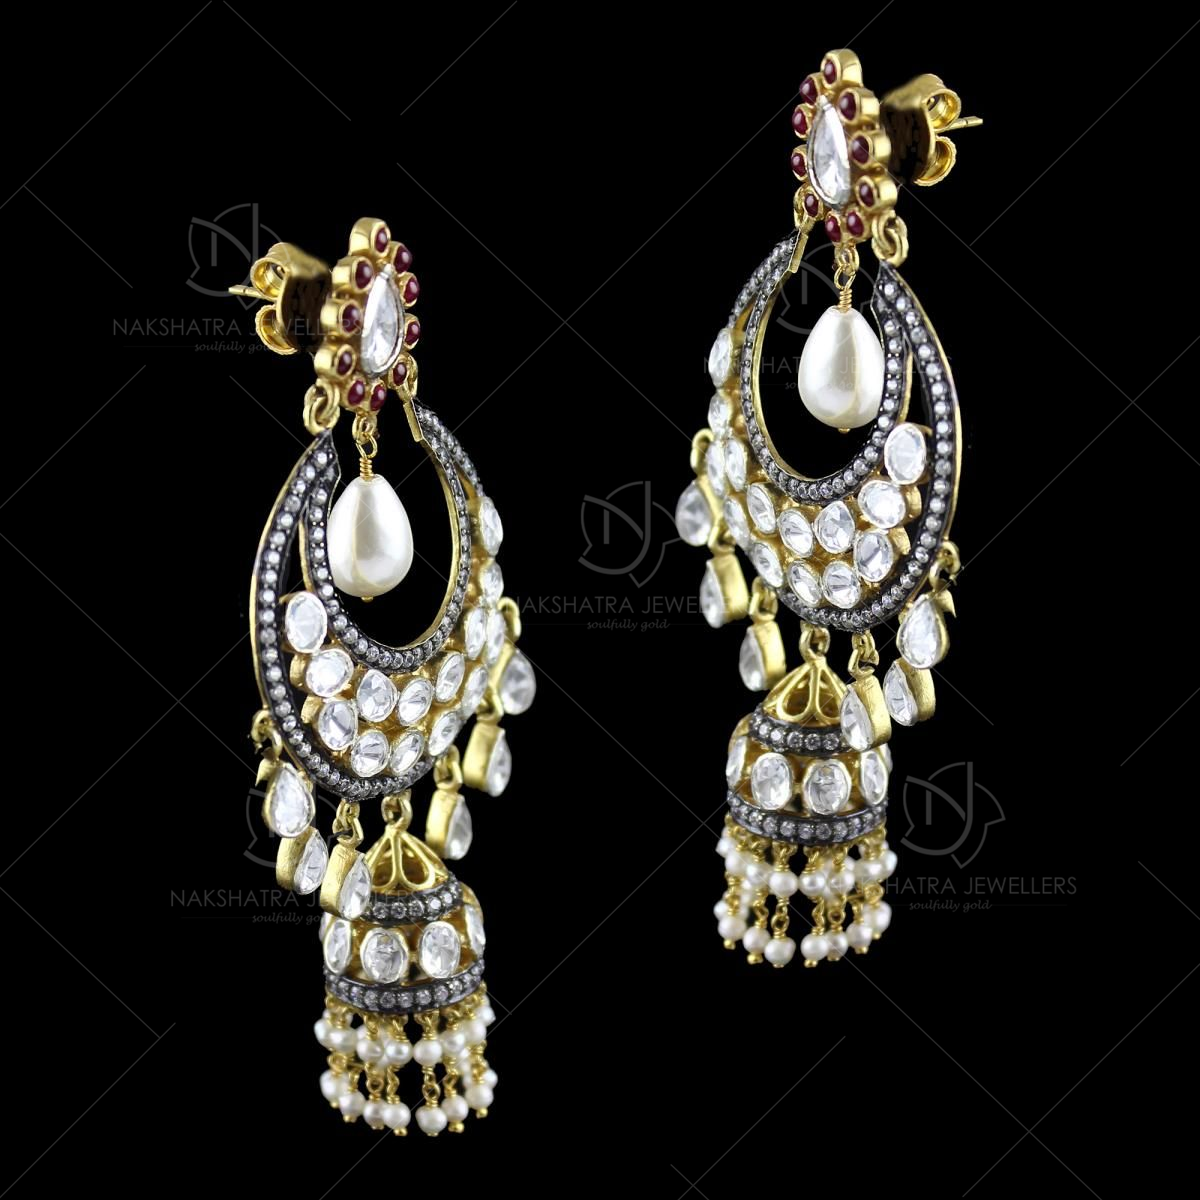 Daily wear gold earrings designs with weight || gold hanging earrings ||  light weight earrings | Gold earrings designs, Gold hanging earrings, Hanging  earrings